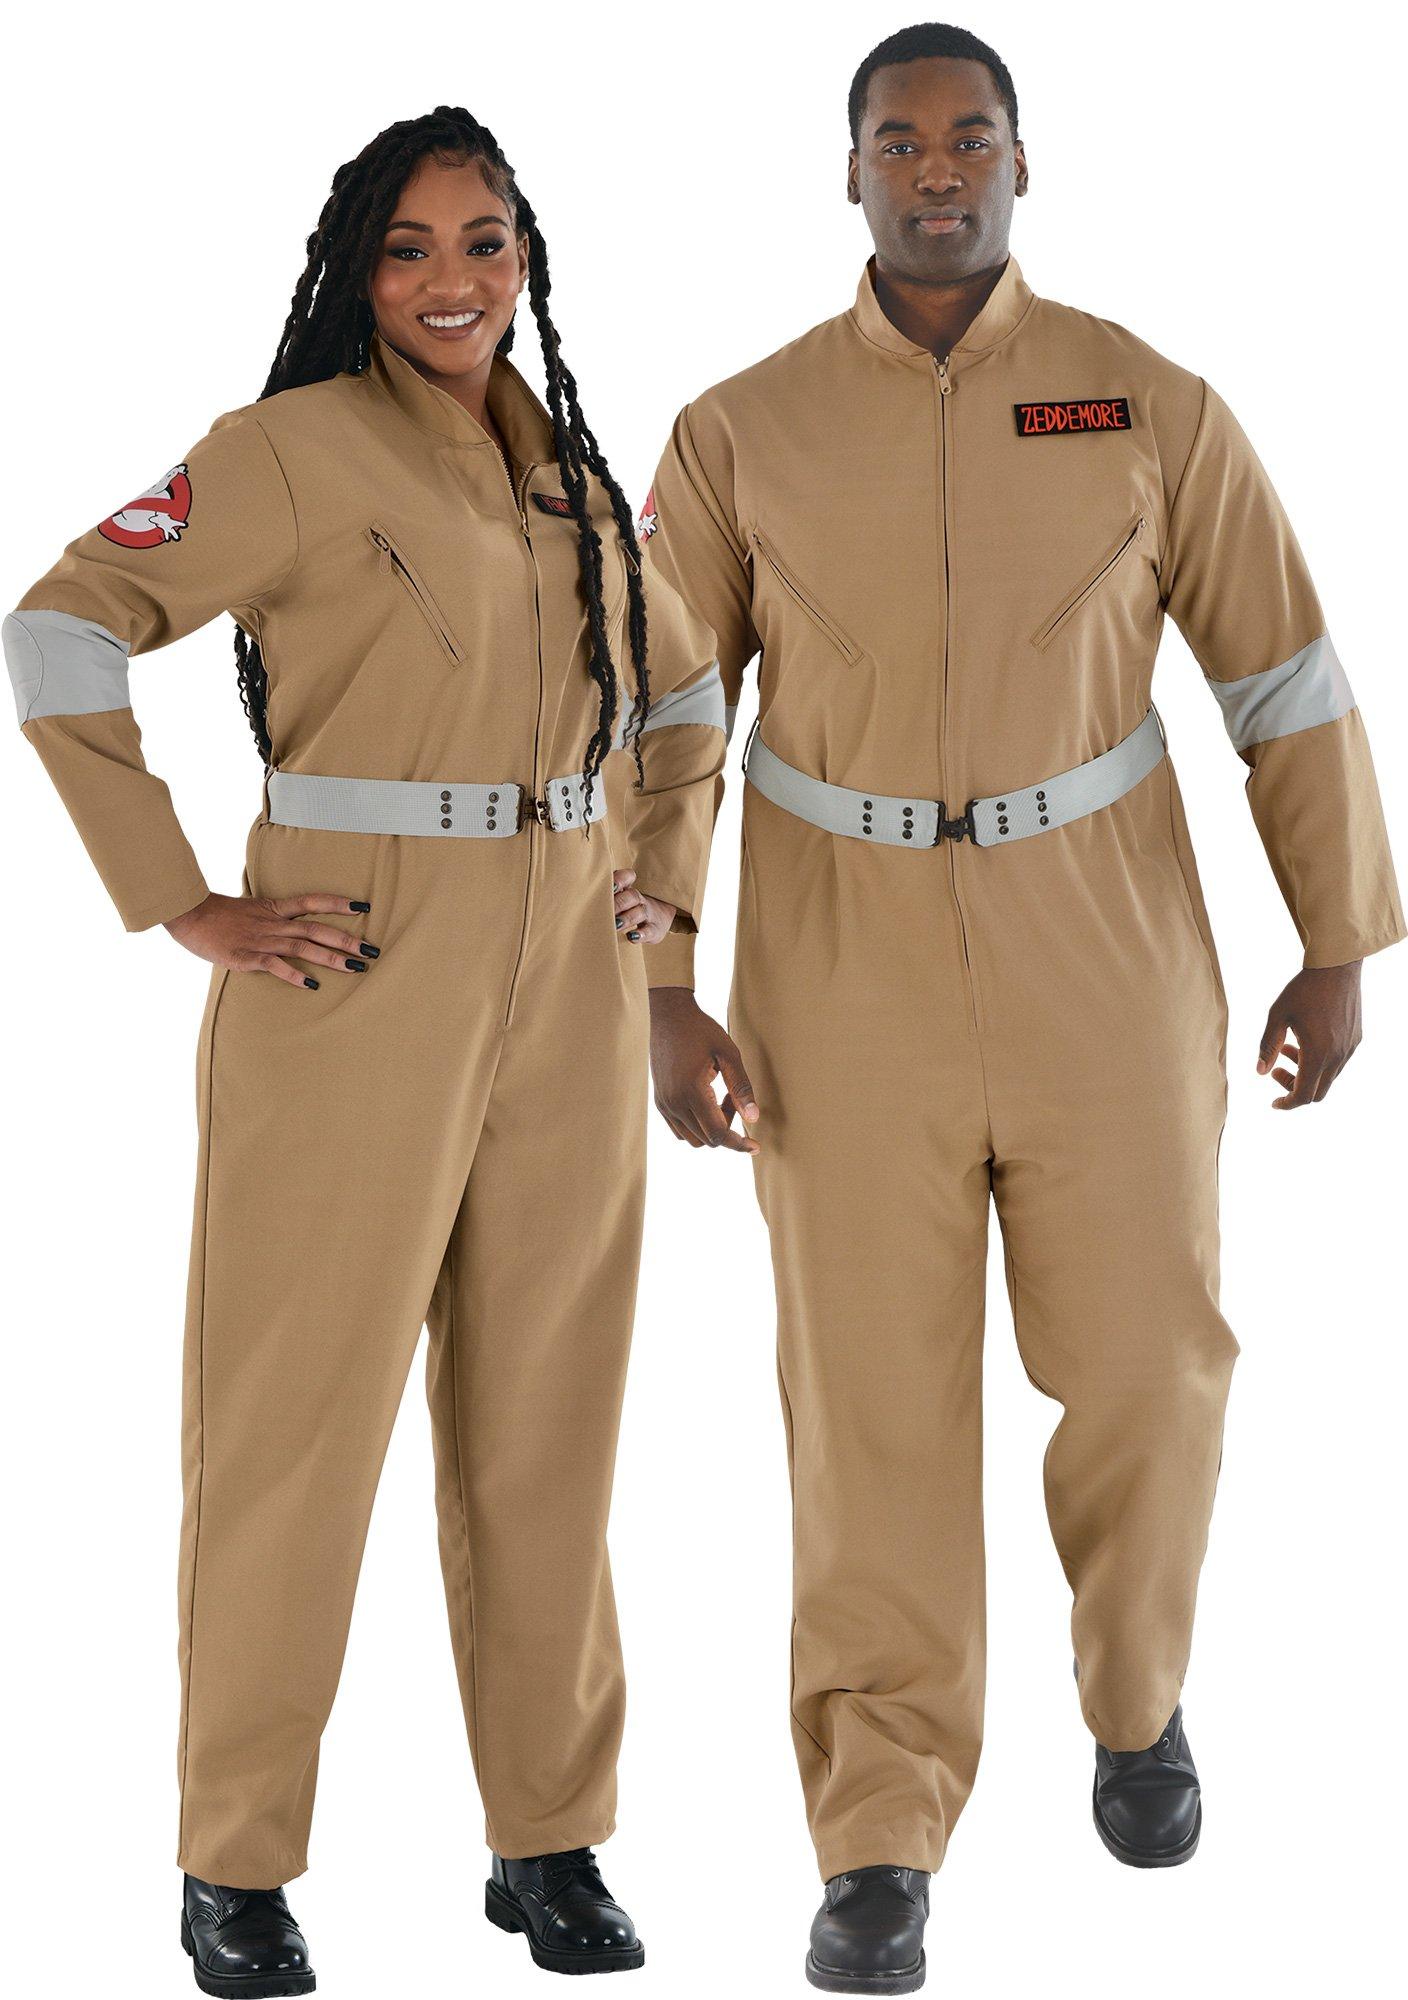 Ghostbusters Couples Costumes